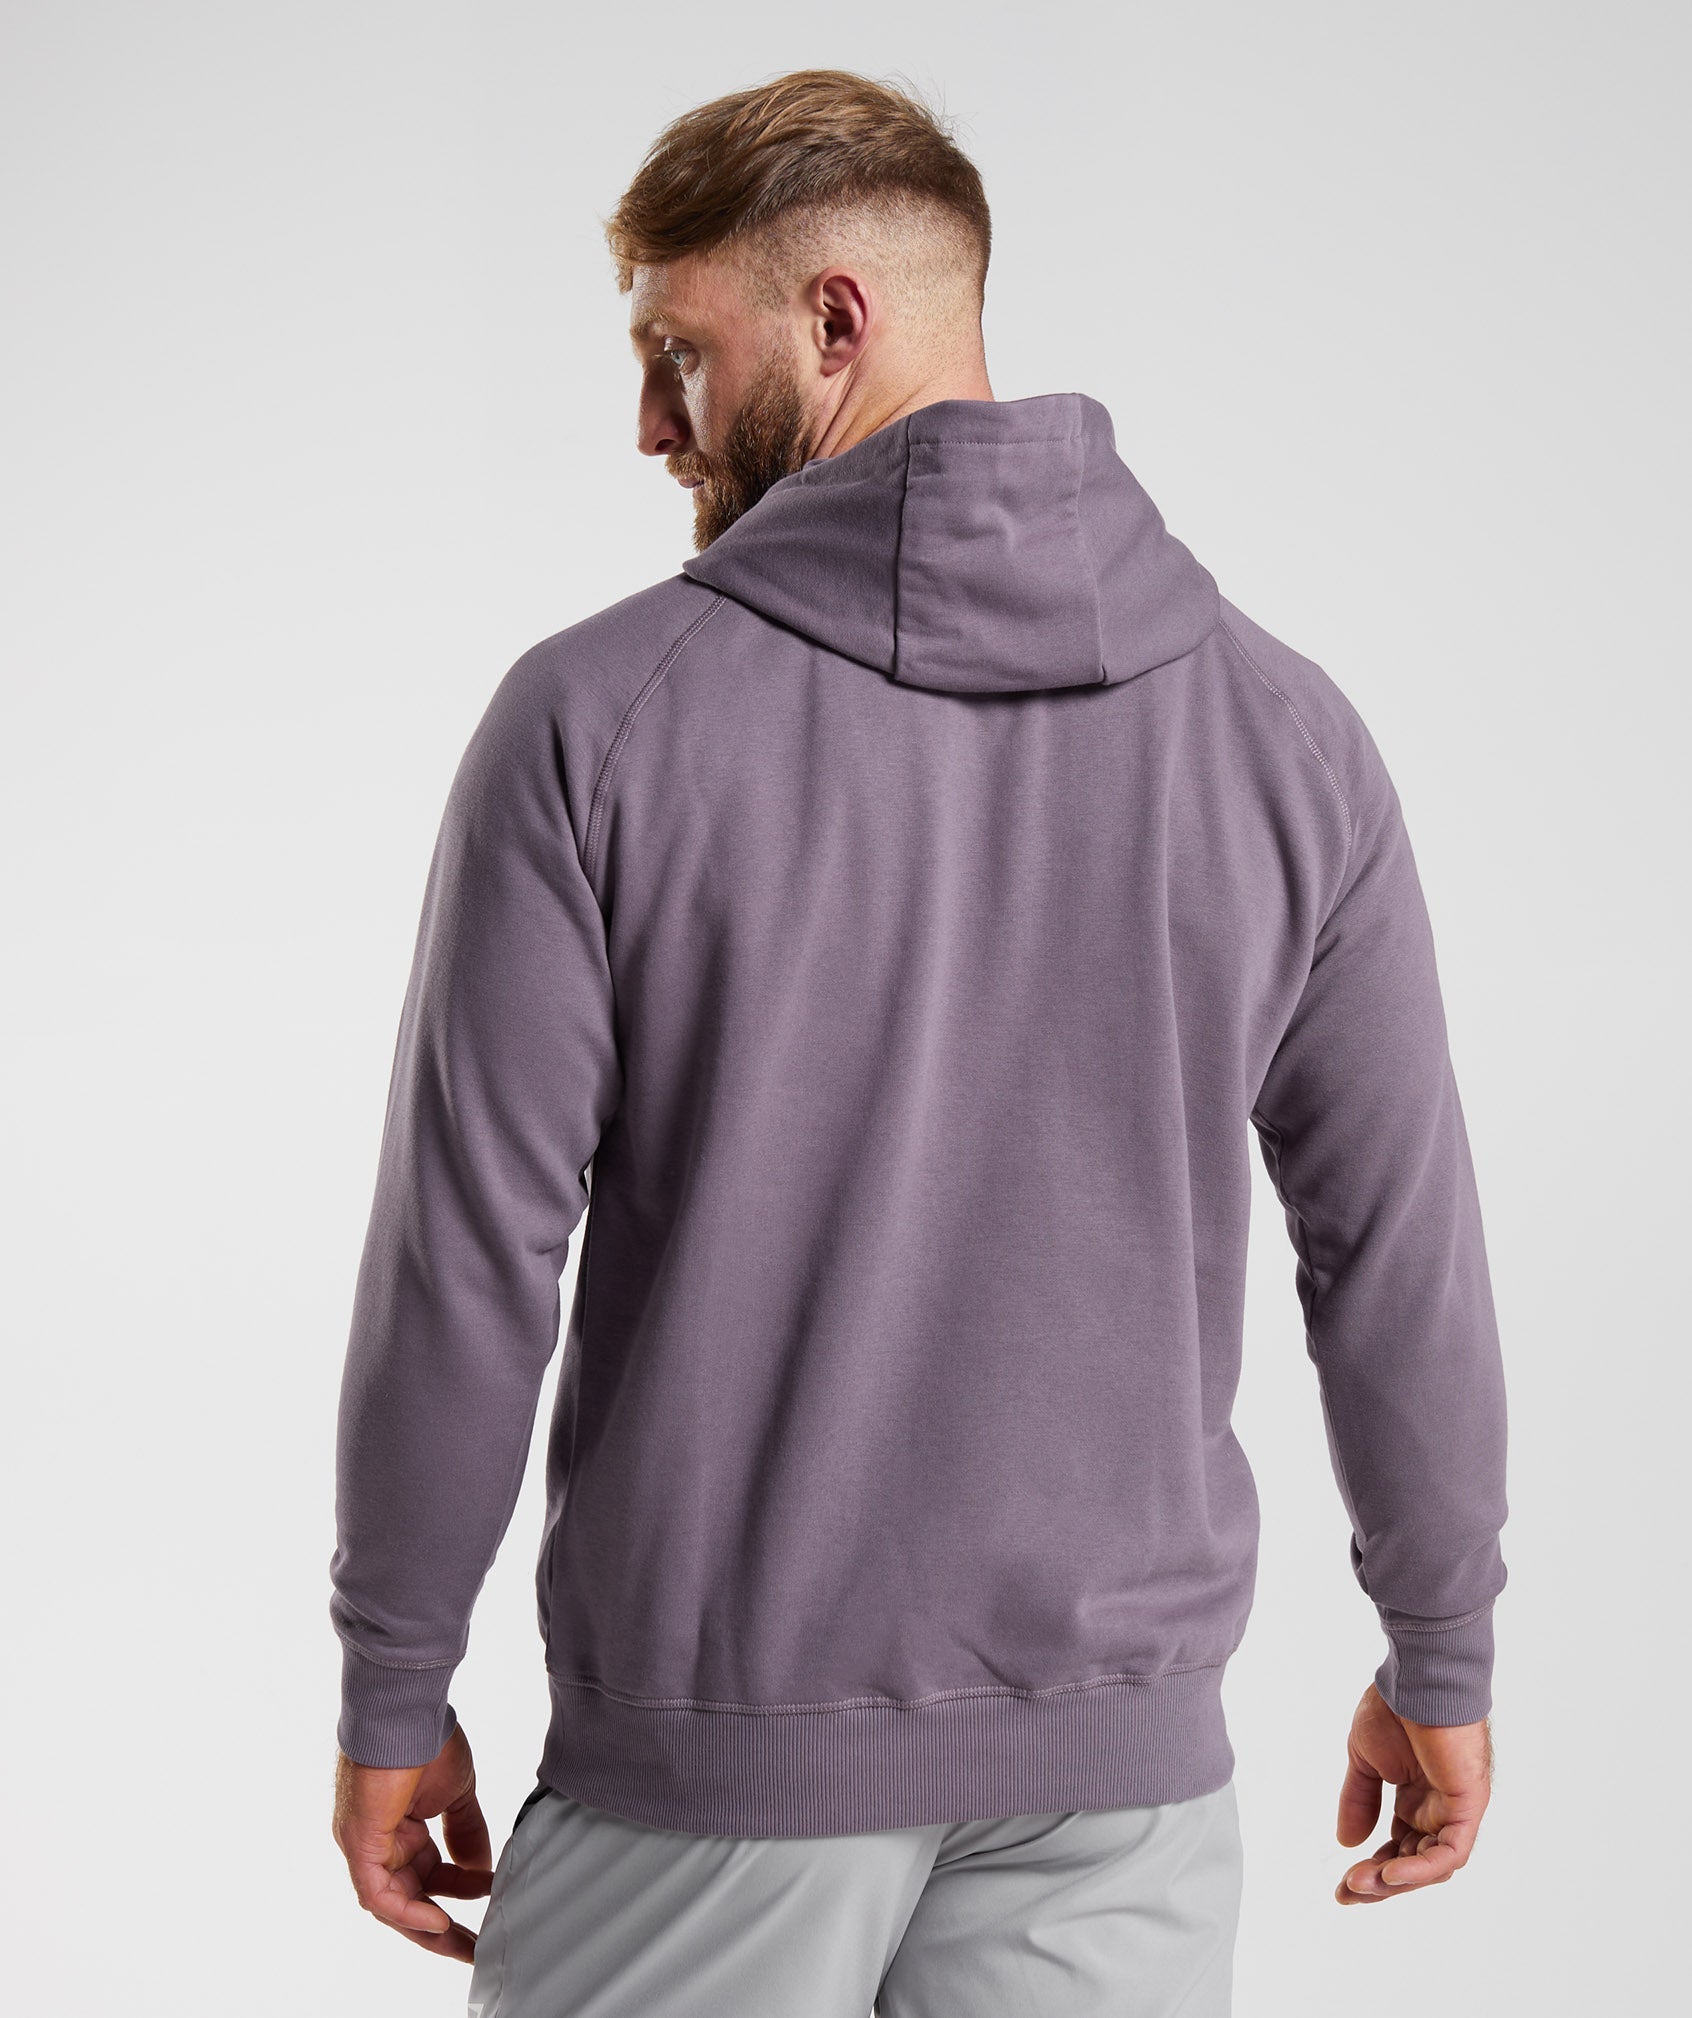 Apollo Hoodie in Musk Lilac